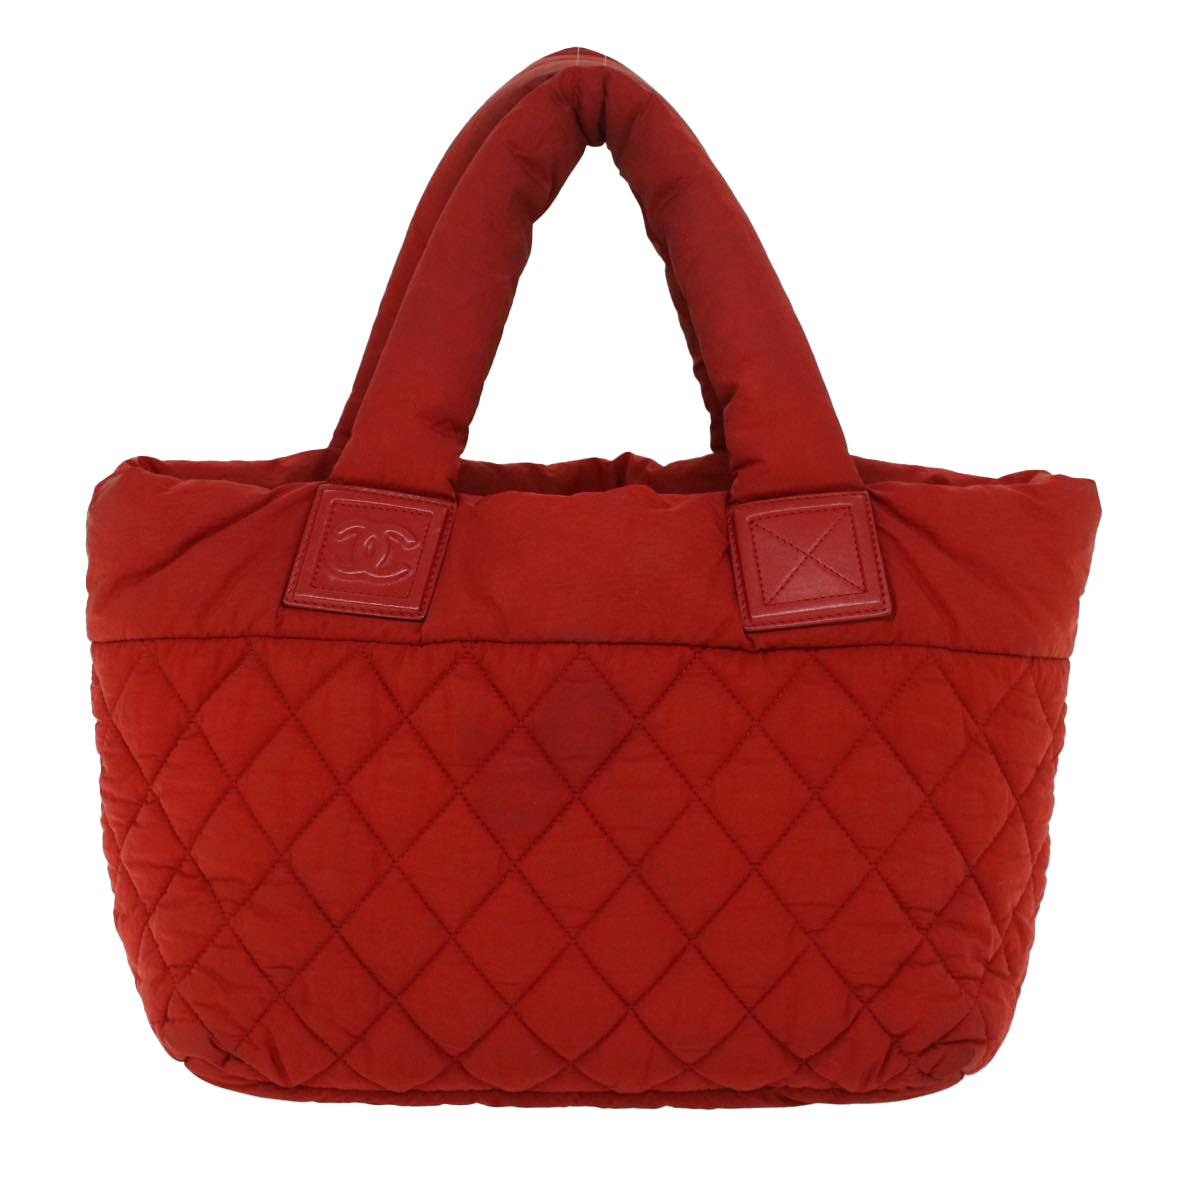 CHANEL Cocoko Koon PM Hand Bag Nylon Red CC Auth bs6489 - 0